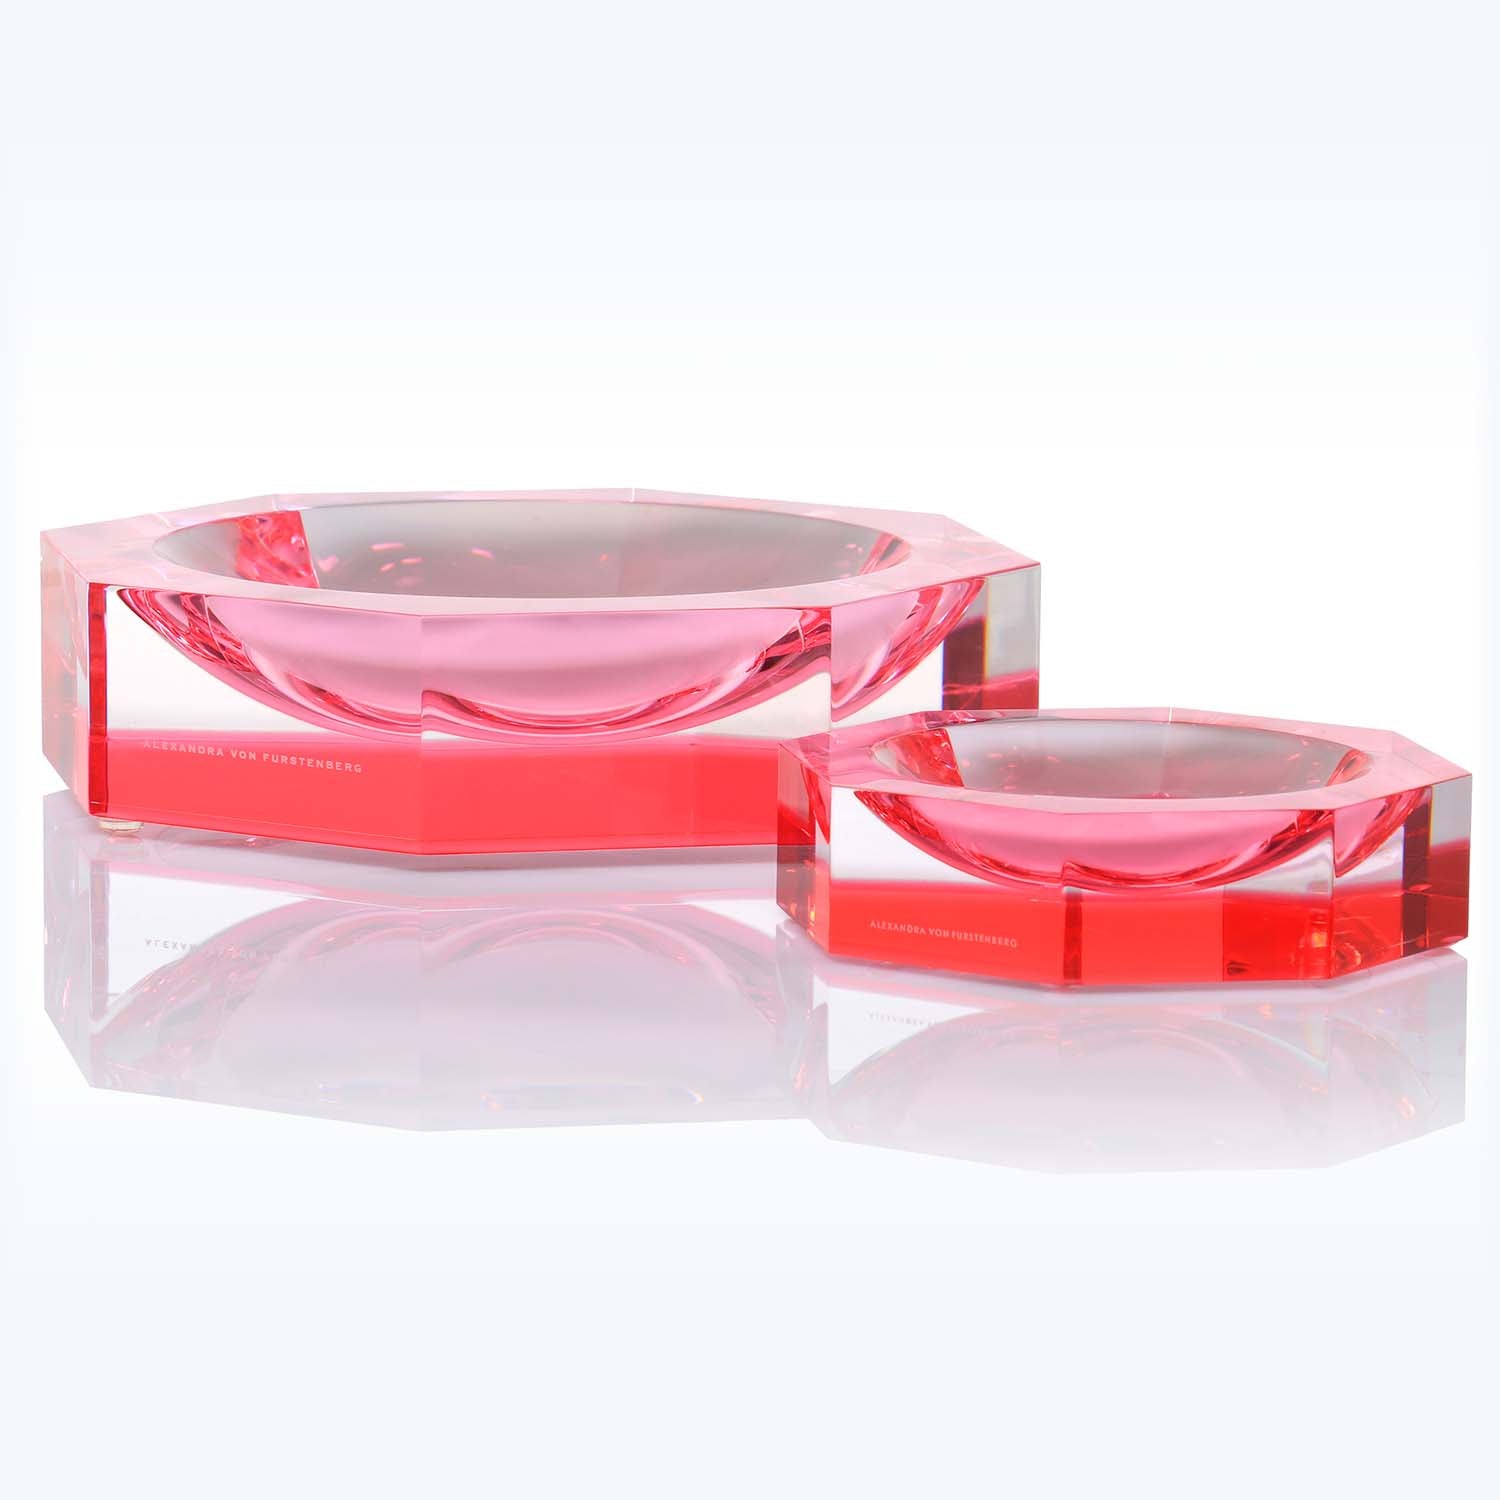 Geometric red glass bowls with glossy finish on reflective surface.